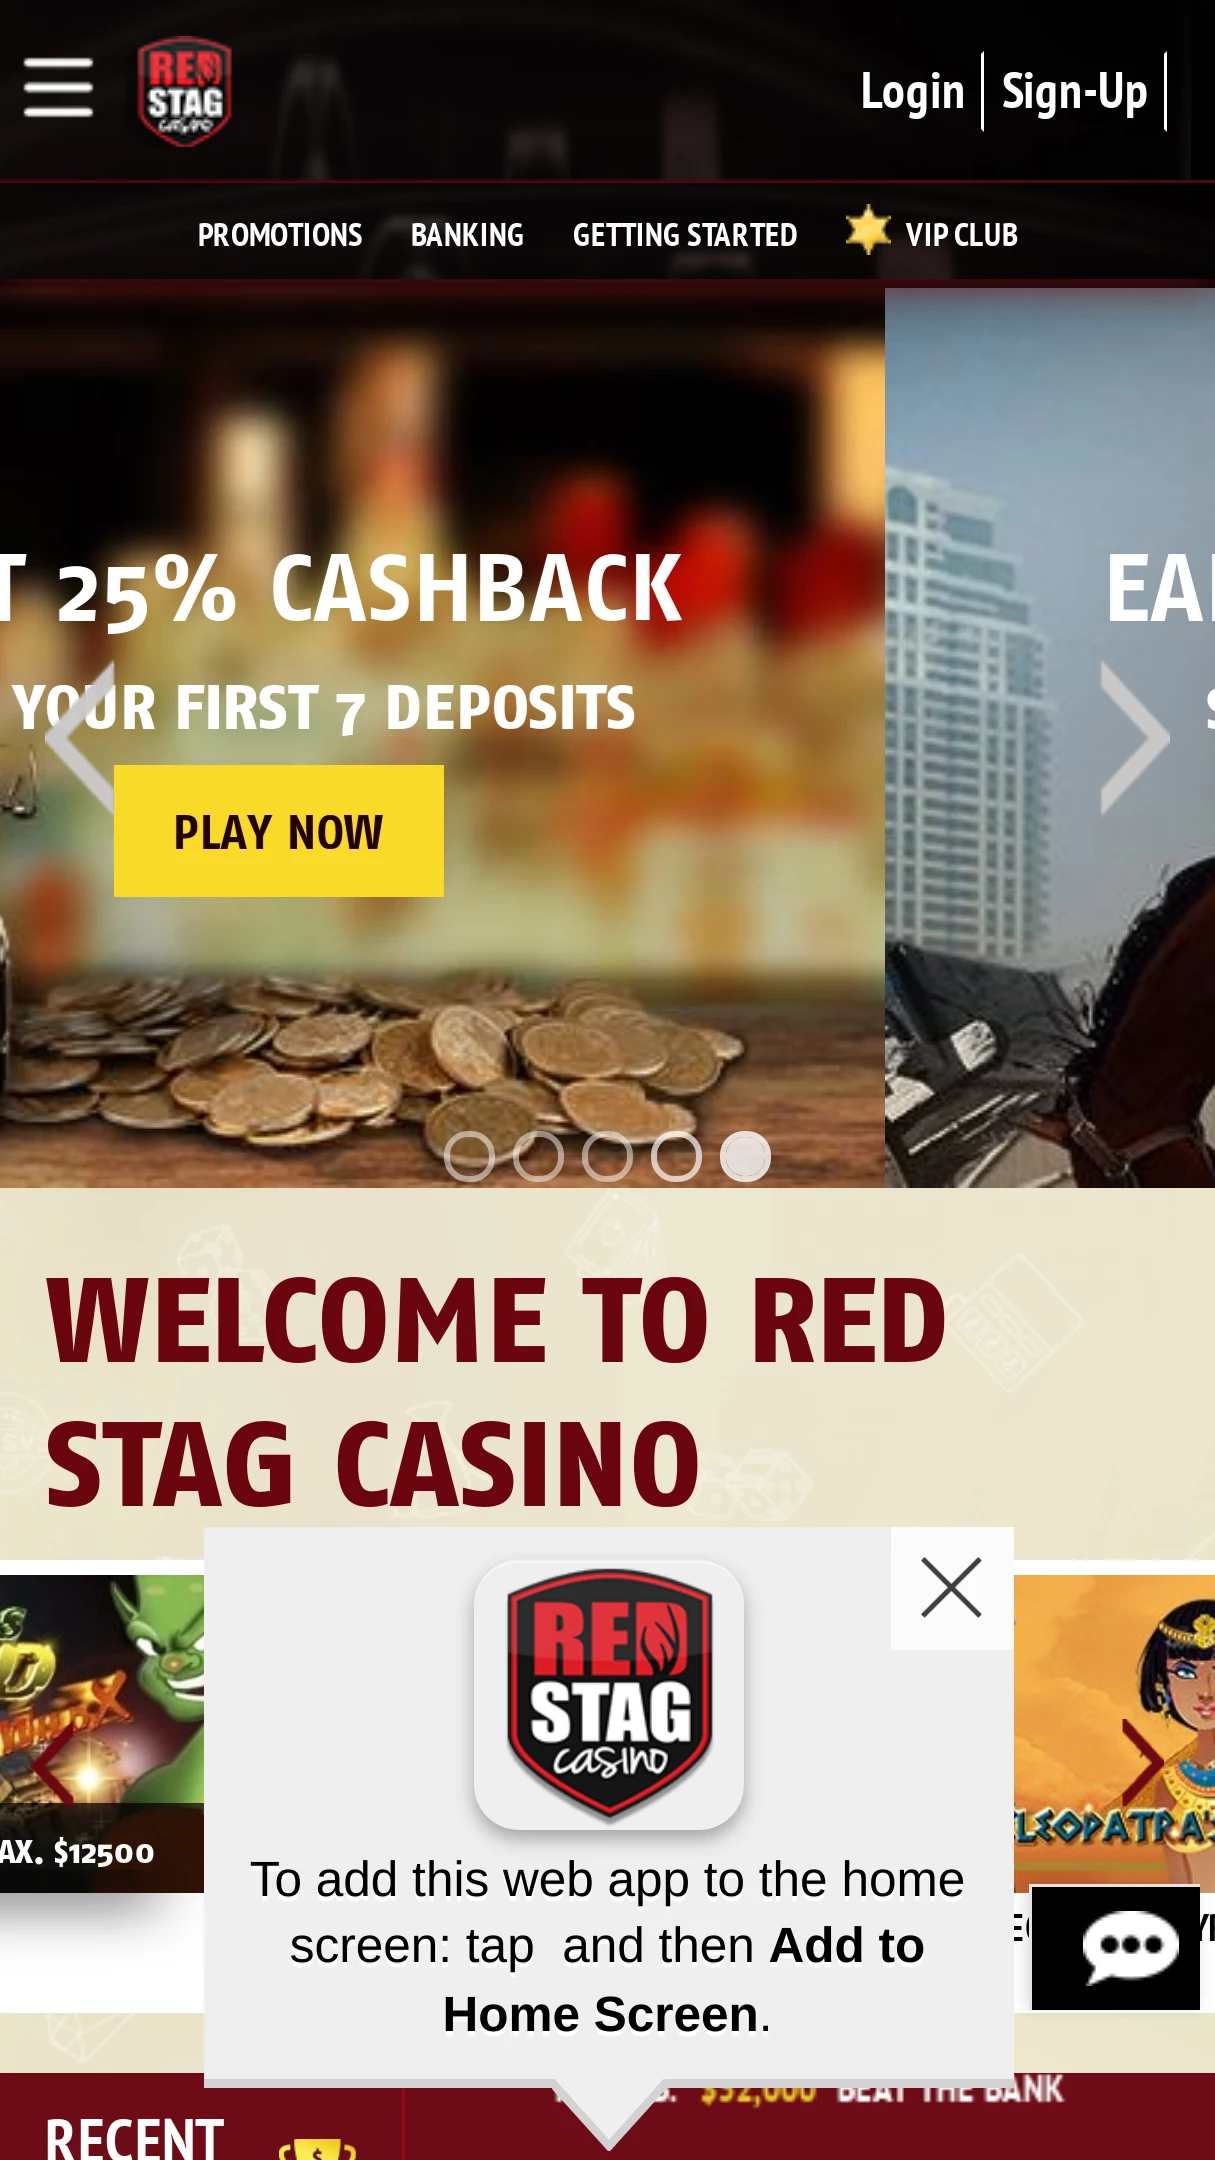 Red Stag Free Spins